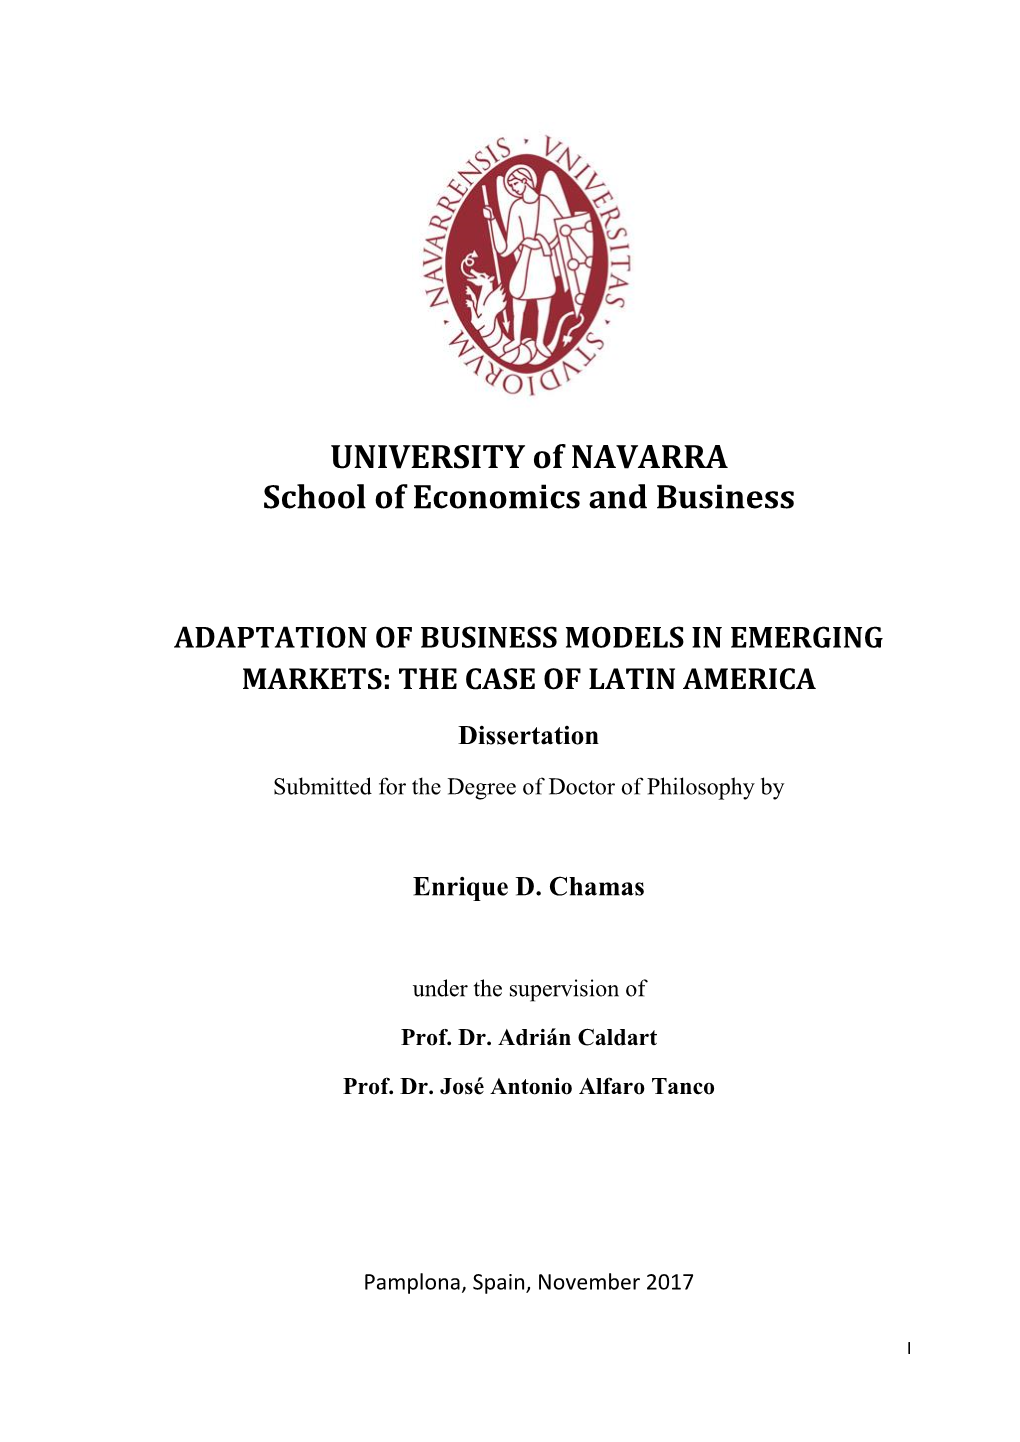 ADAPTATION of BUSINESS MODELS in EMERGING MARKETS: the CASE of LATIN AMERICA Dissertation